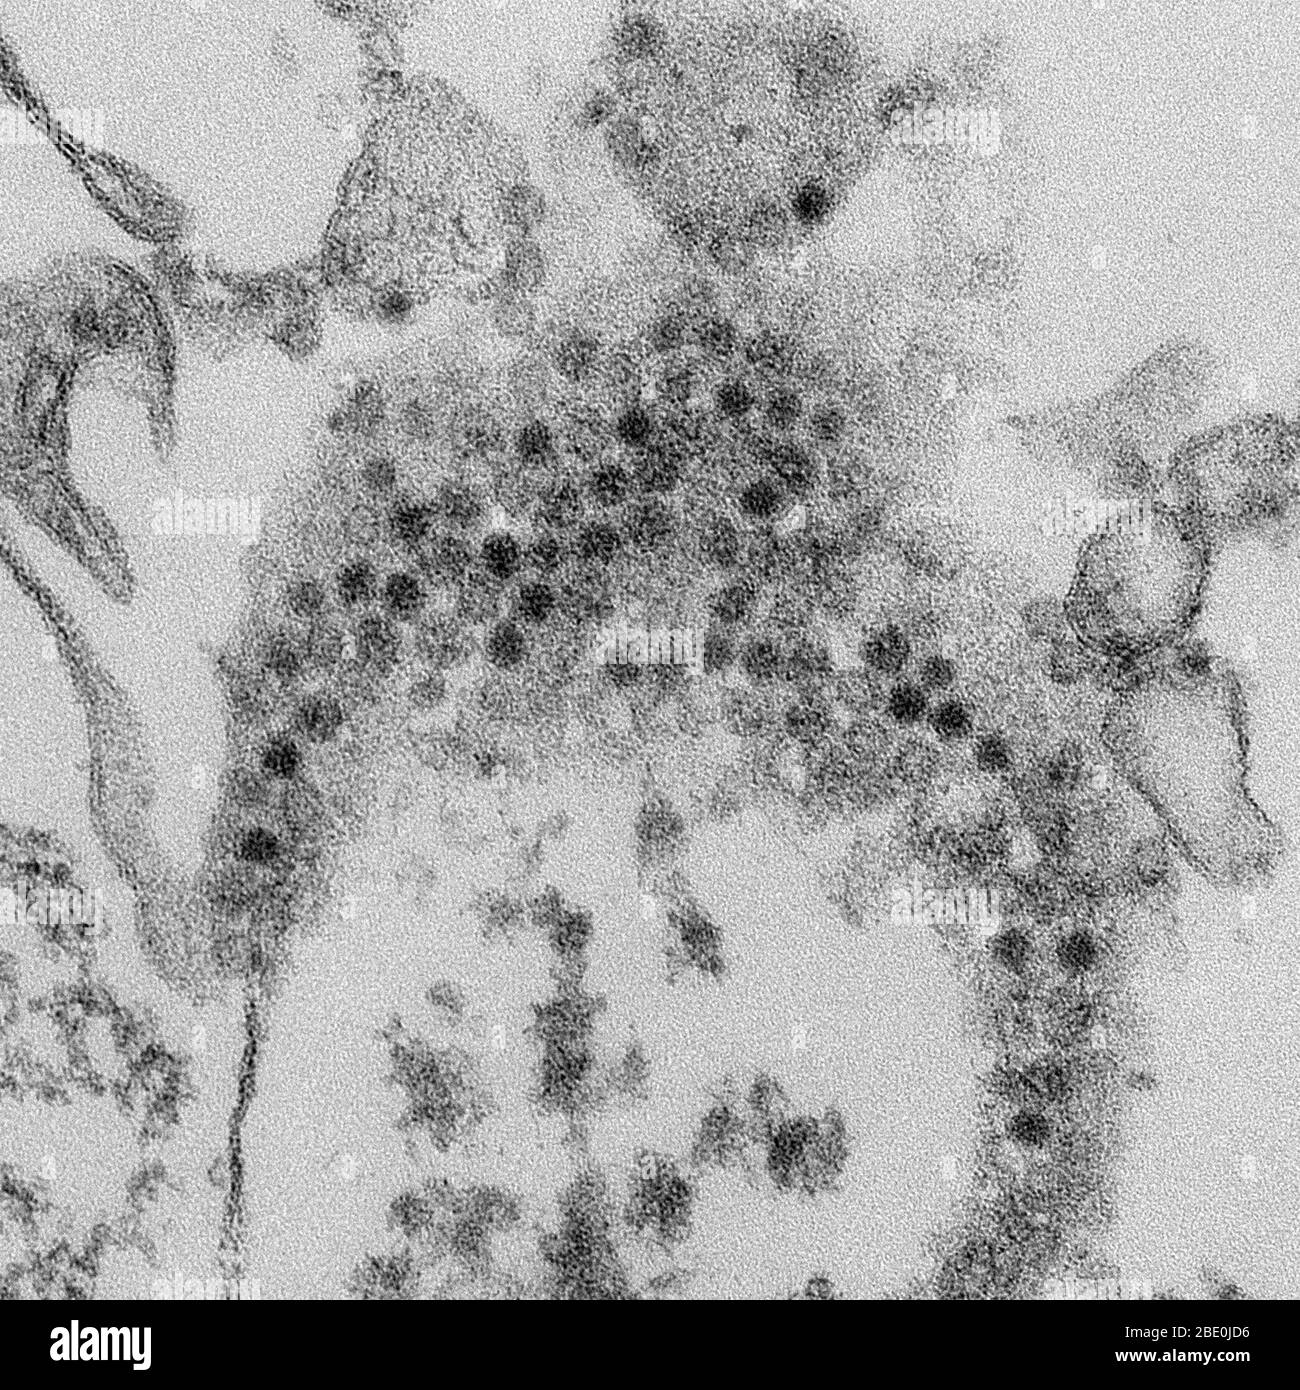 Transmission Electron Micrograph (TEM) reveals numerous, spheroid-shaped Enterovirus 68 (EV68, EV-D68, HEV68) visions which are a member of the Picornaviridae family, an enterovirus. First isolated in California in 1962 and once considered rare, it has been on a worldwide upswing in the 21st century. With some uncertainty, it has been implicated in cases of a polio-like disorder called acute flaccid myelitis. Acute flaccid myelitis (AFM) is a neurologic illness of sudden onset in children. It presents with localized limb weakness of unknown cause. Enterovirus 68, which as a member of the enter Stock Photo